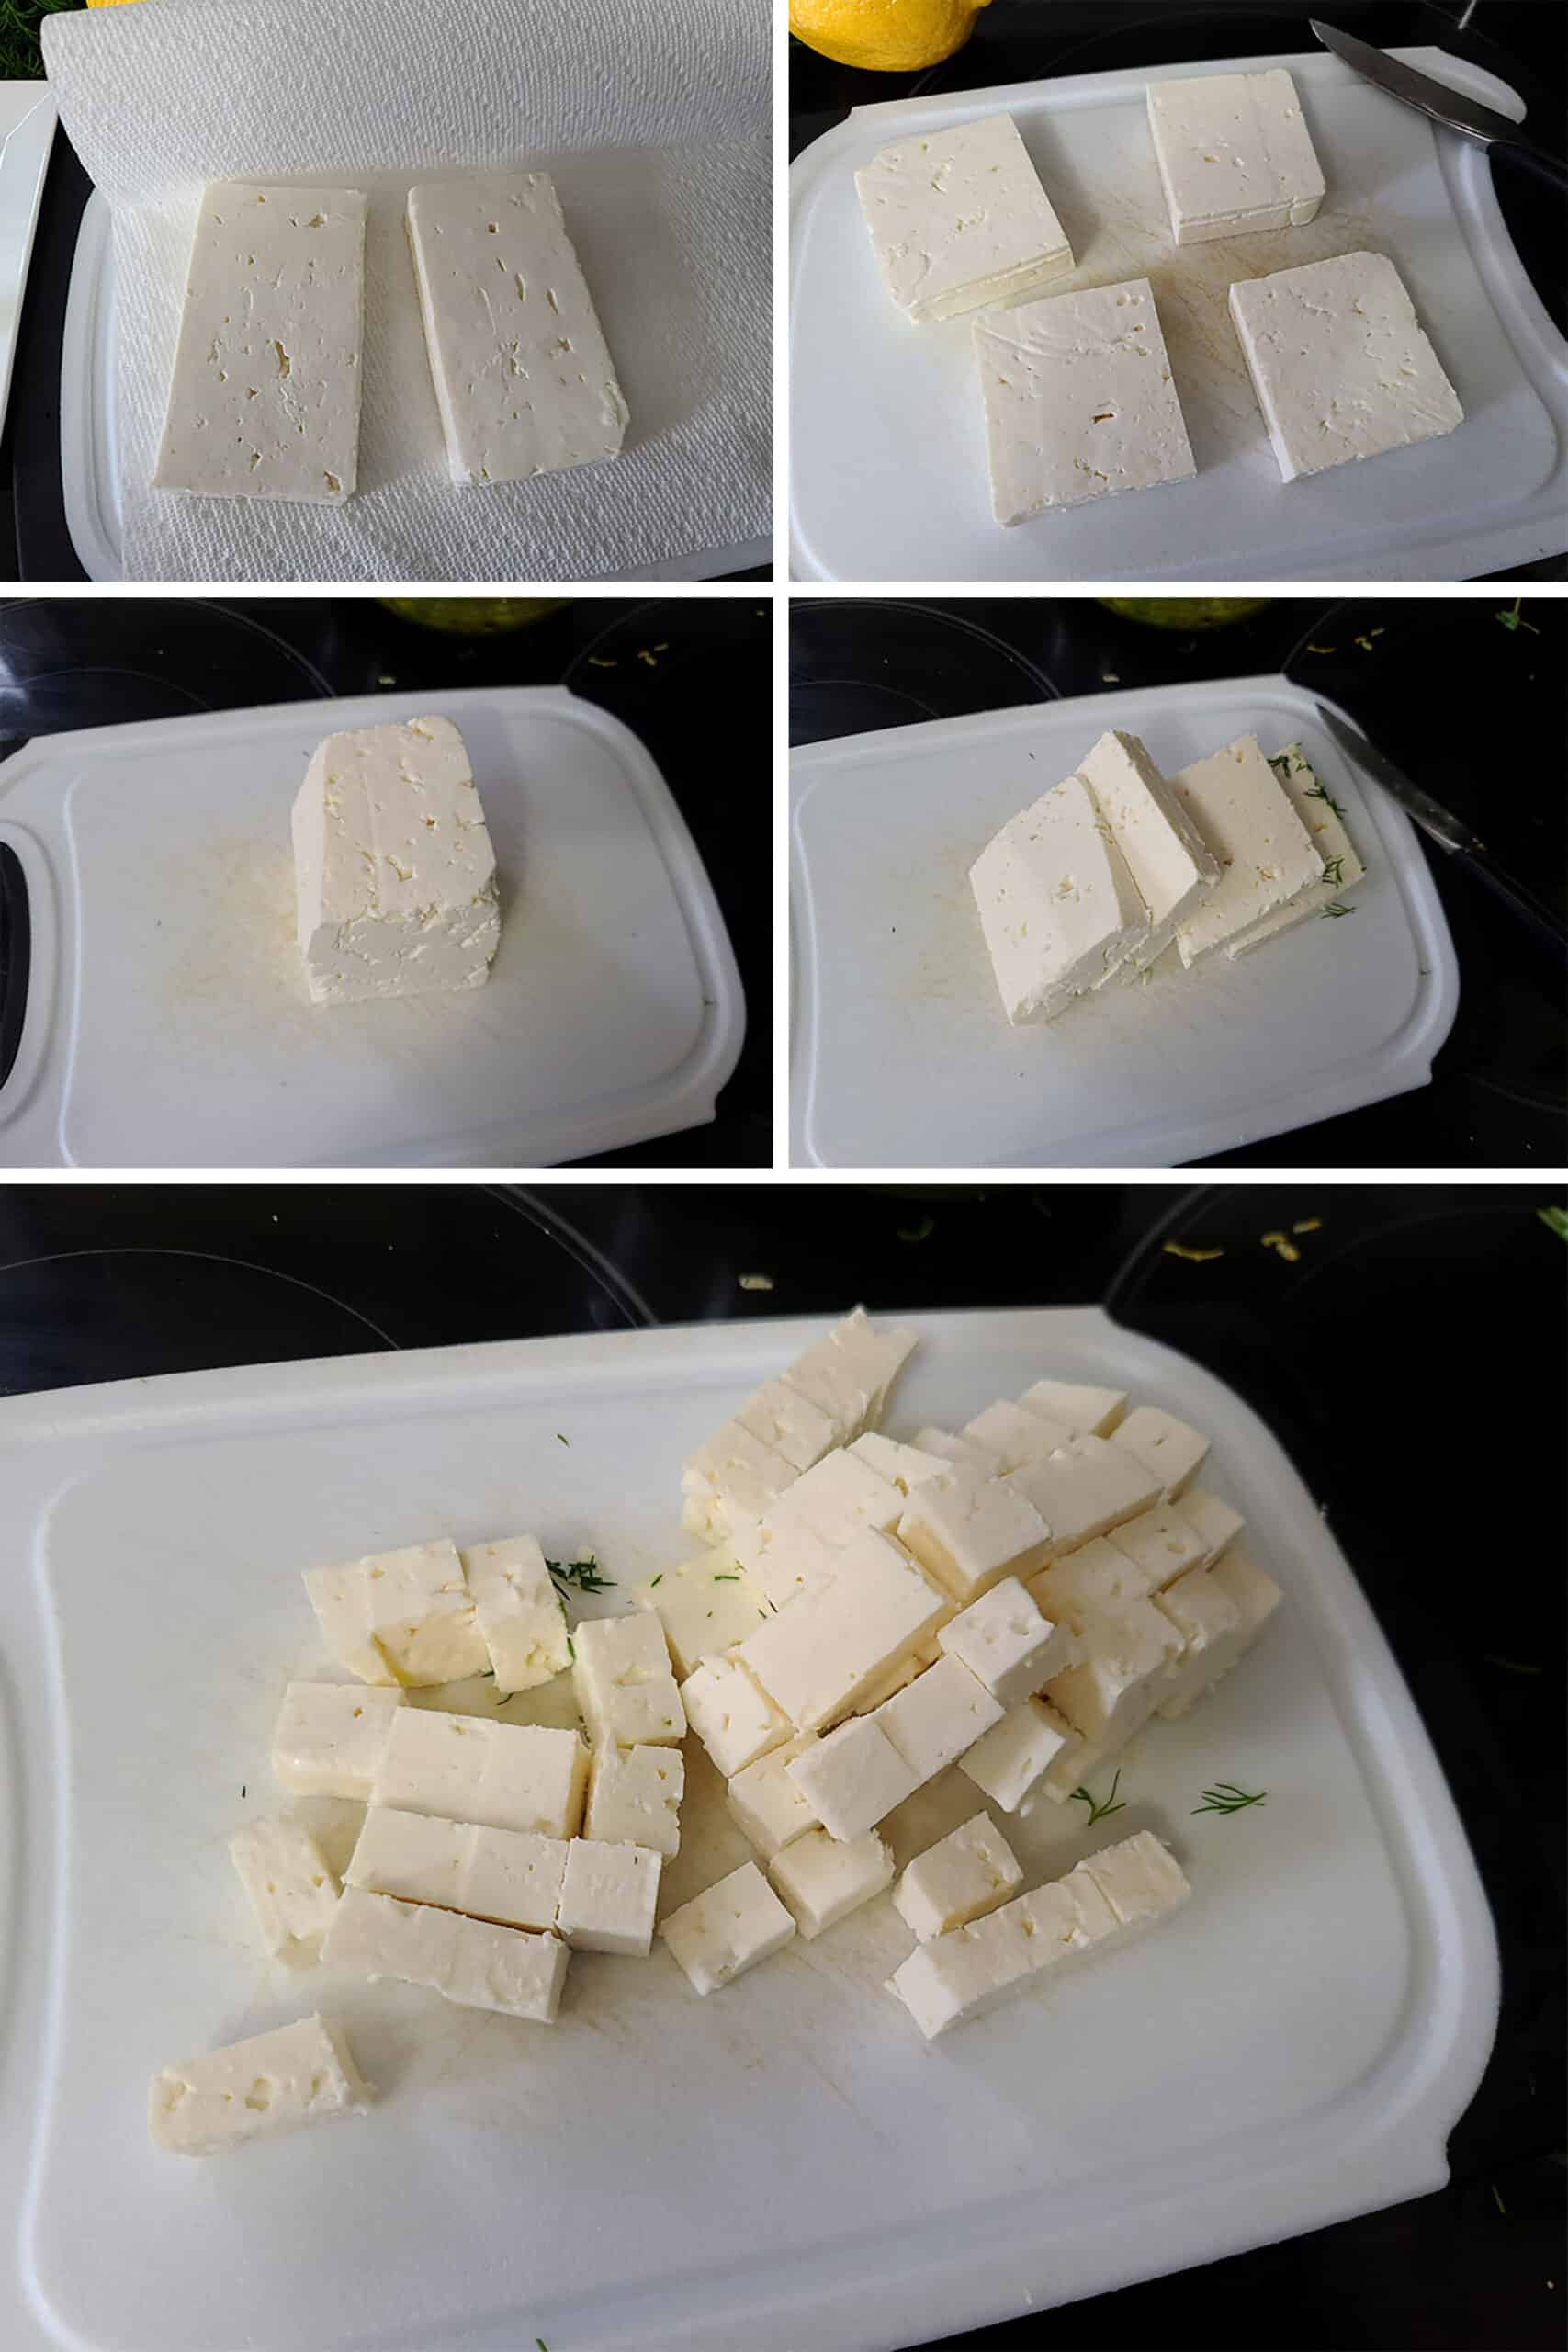 A 5 part image showing a brick of feta cheese being sliced into thin squares, and cut into small cubes.